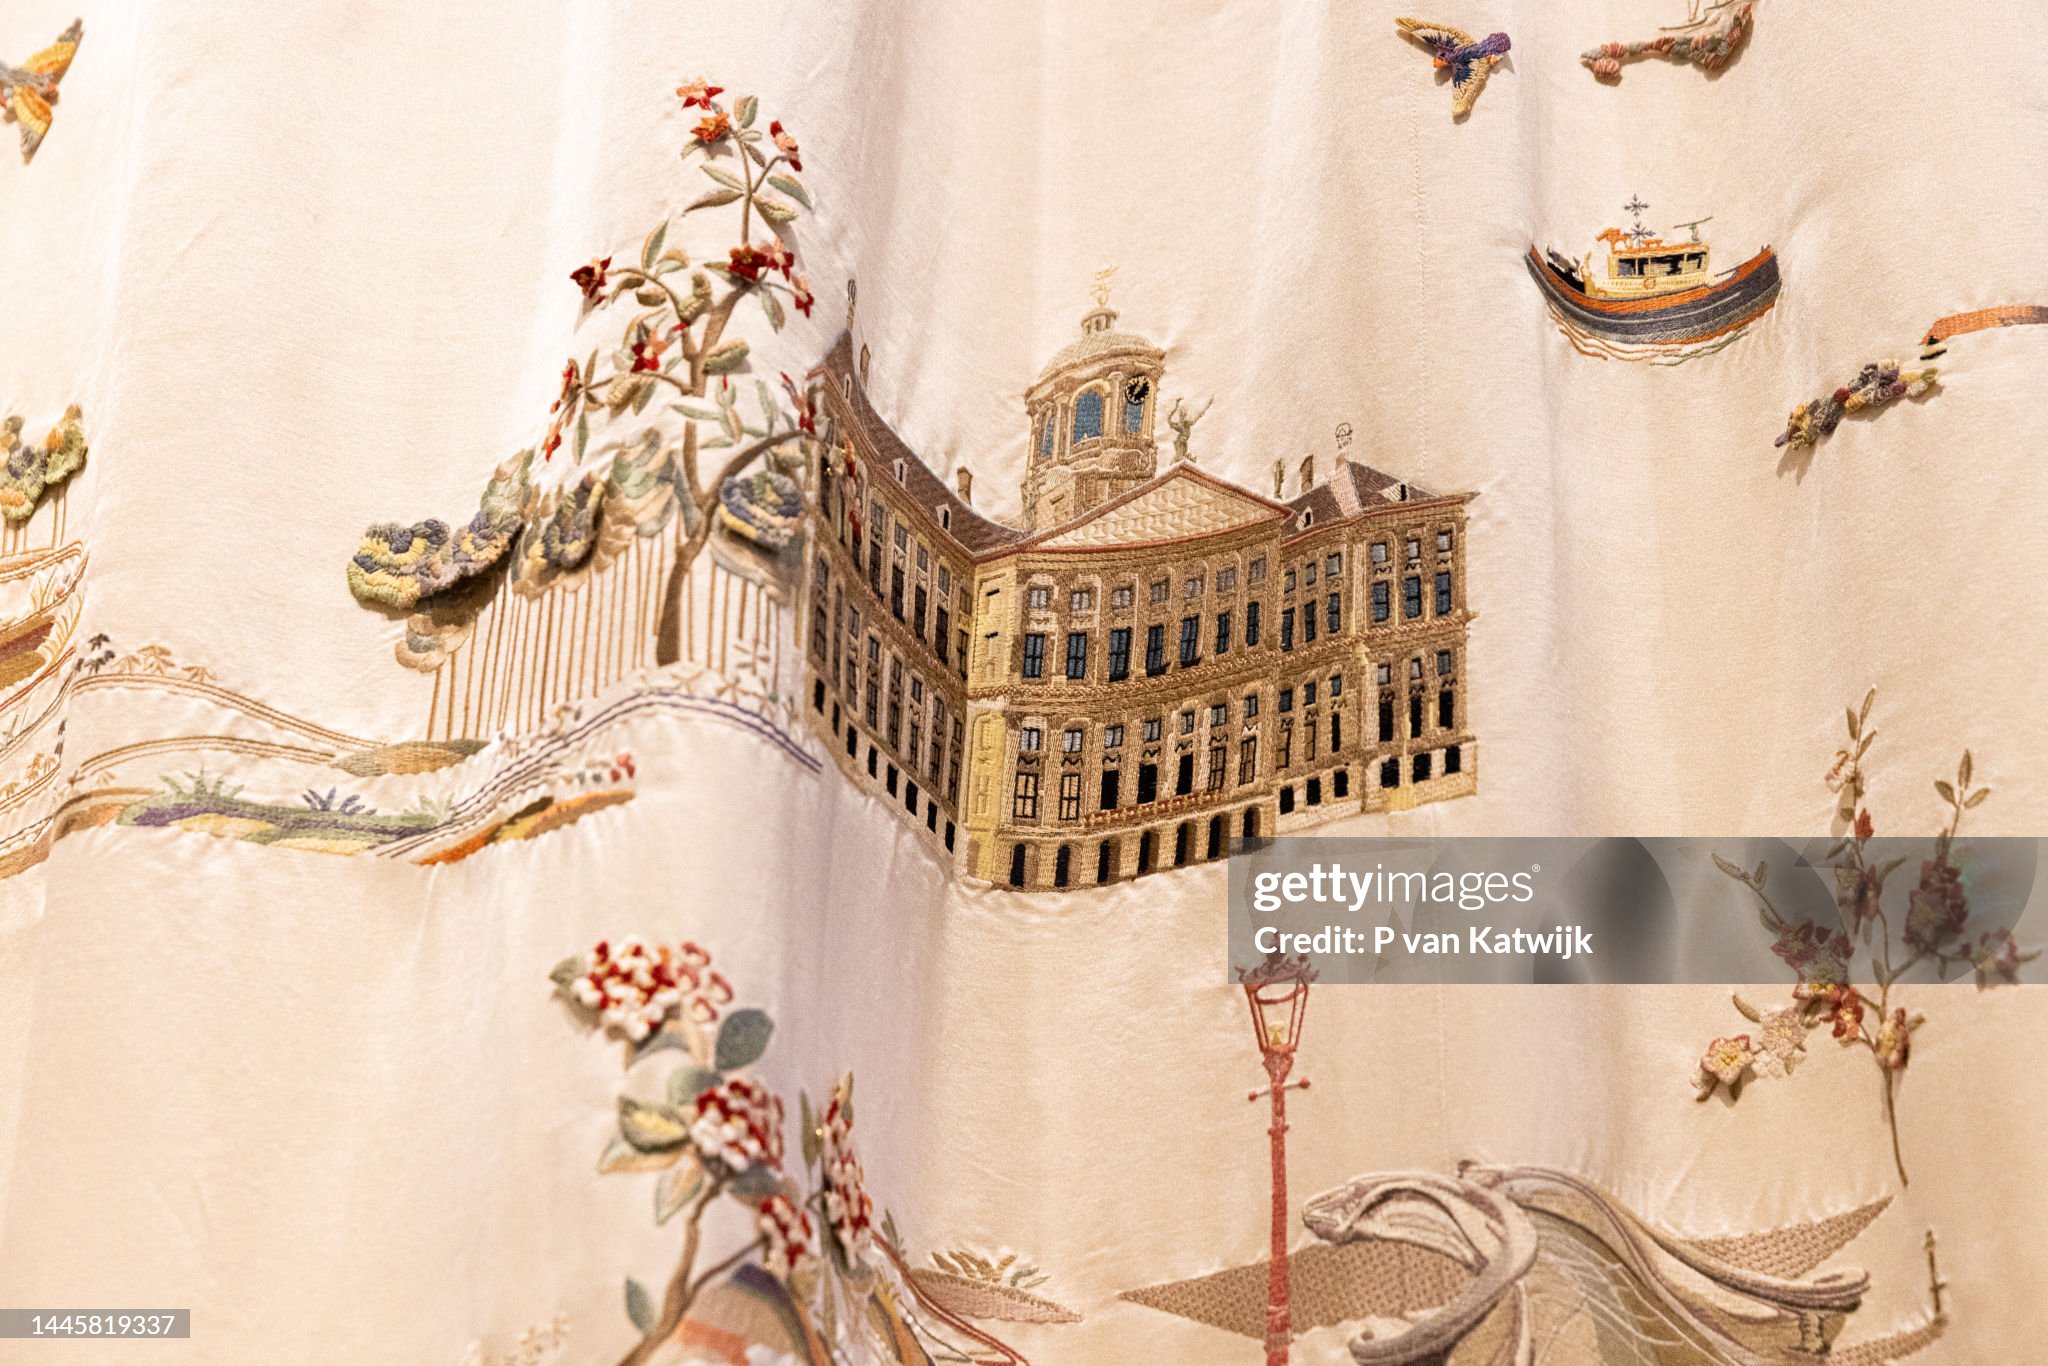 queen-maxima-of-the-netherlands-visits-textile-museum-to-present-her-new-curtains-for-palace.jpg?s=2048x2048&w=gi&k=20&c=1xoPdefdbVhPqeuCzbKvZ5-95YT60UIDg83wSsi1Xiw=